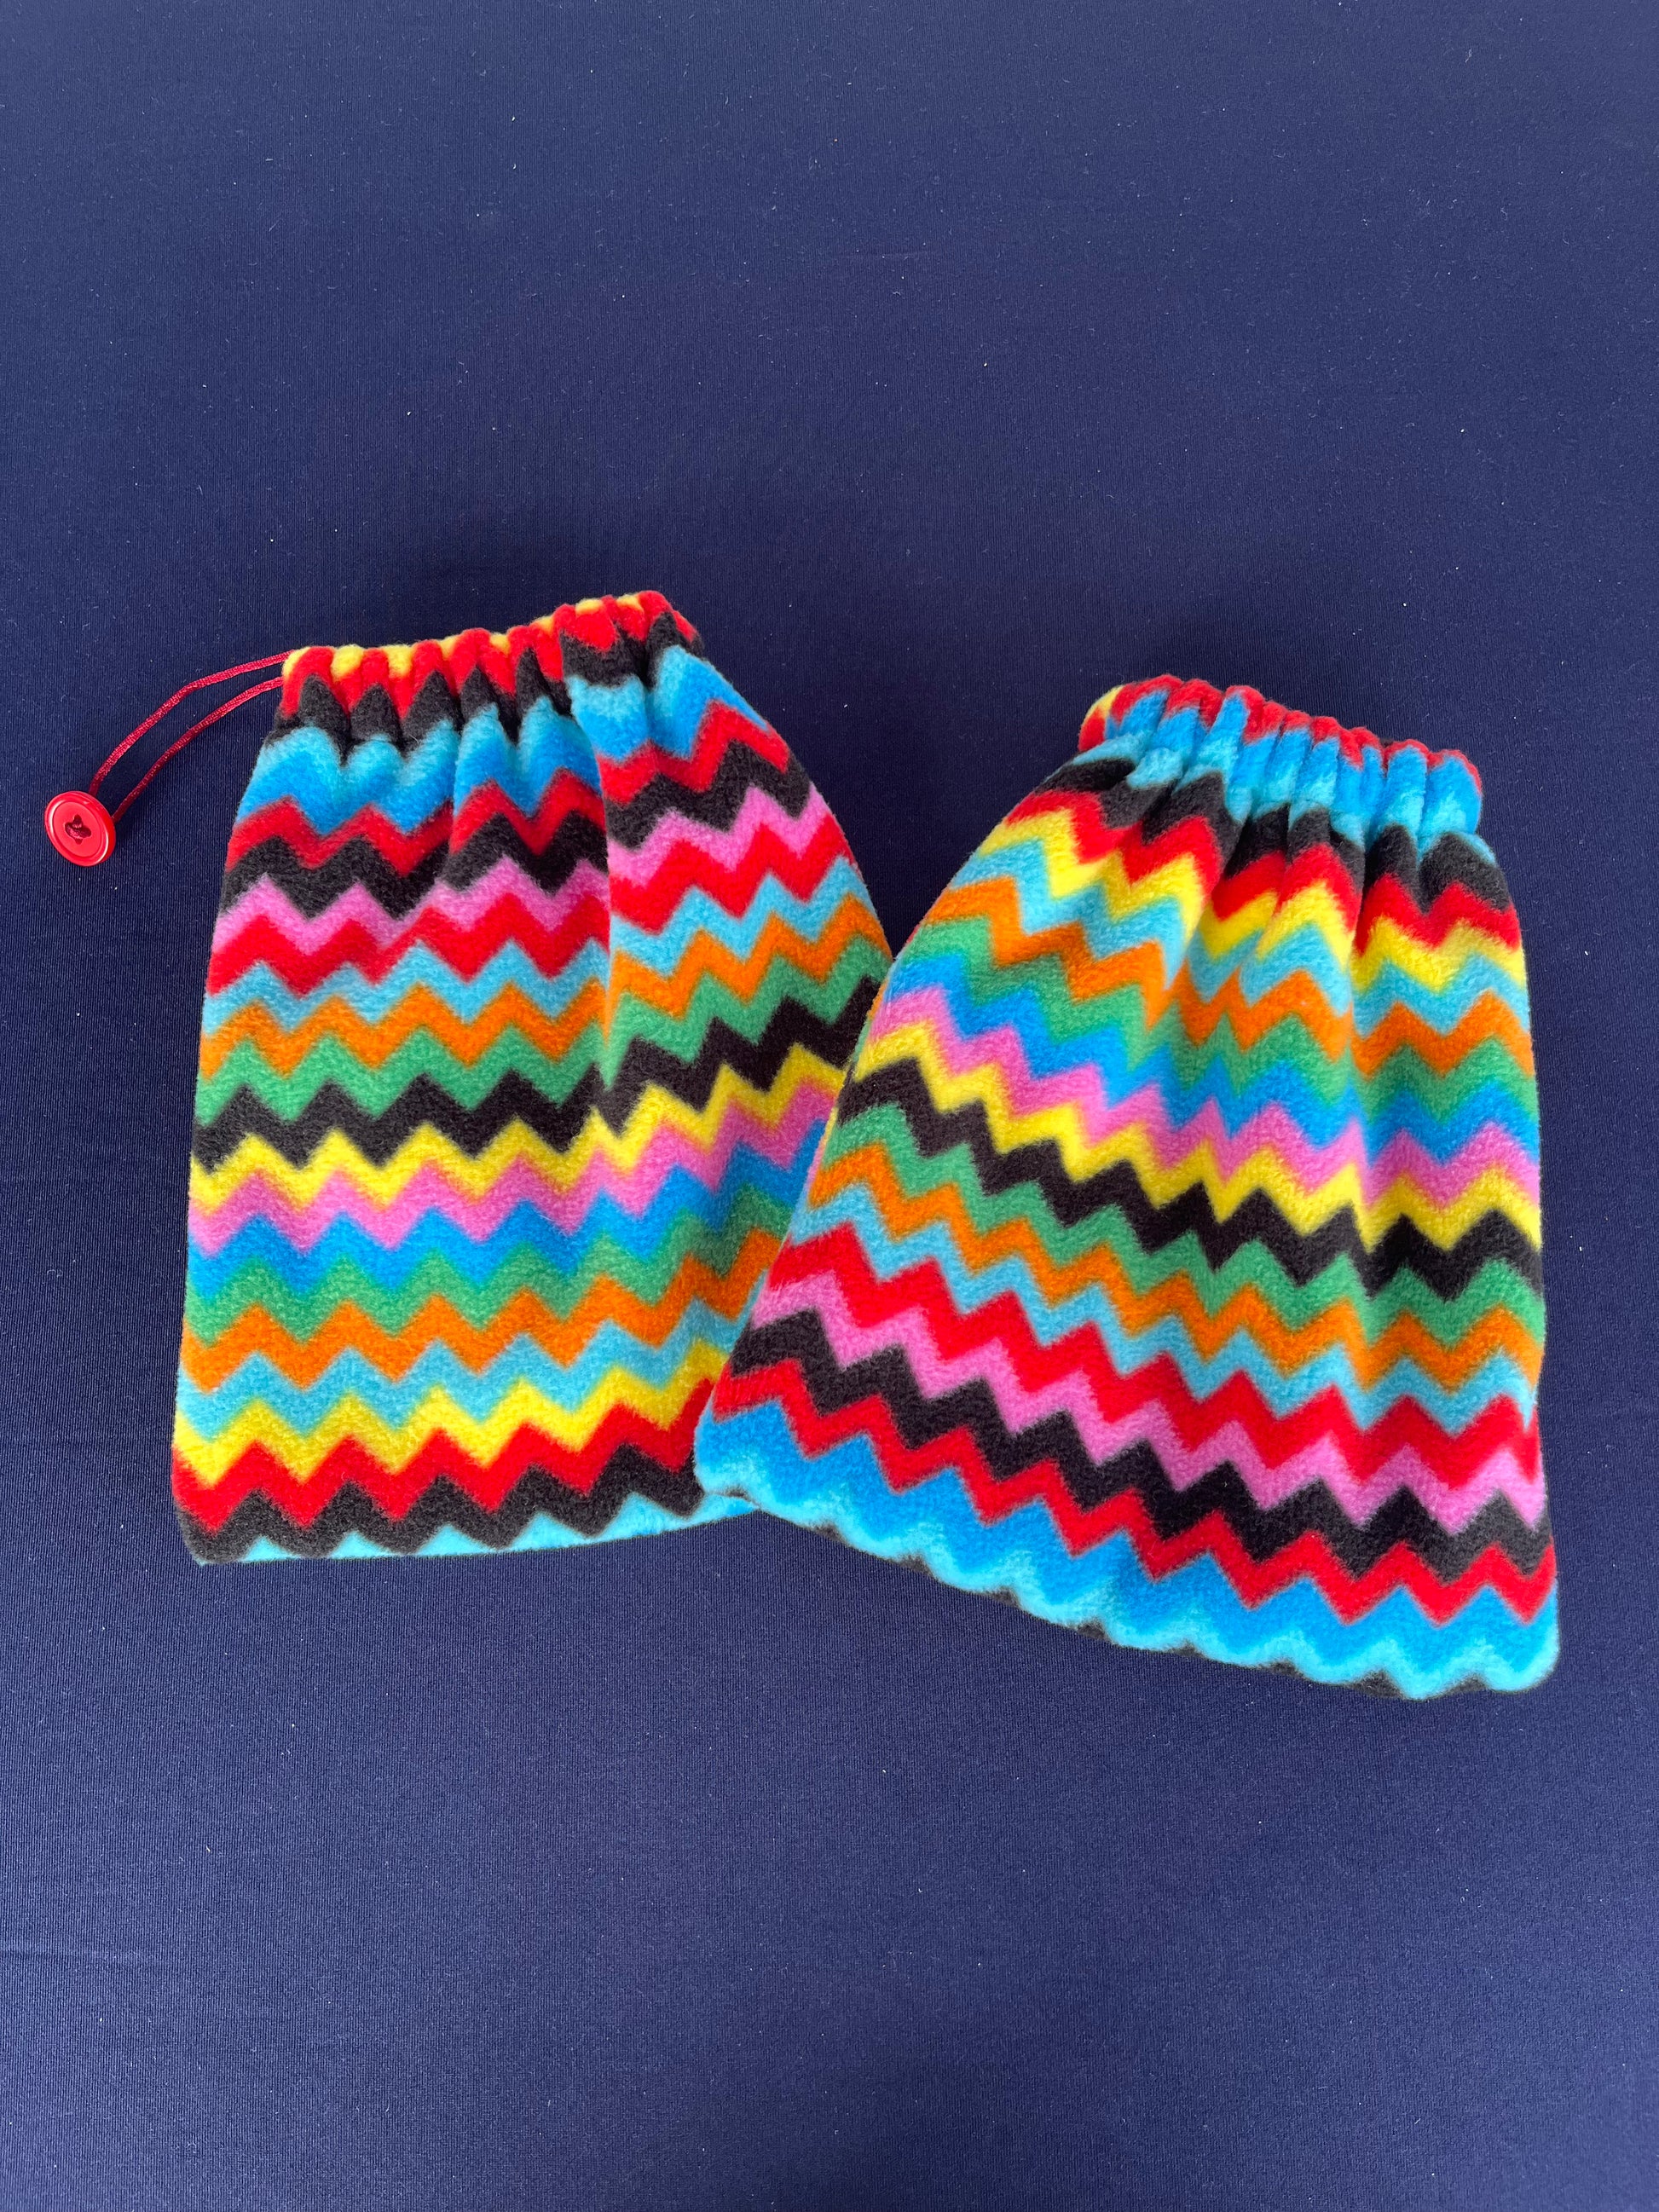 stirrup covers with multicoloured zigzags on them